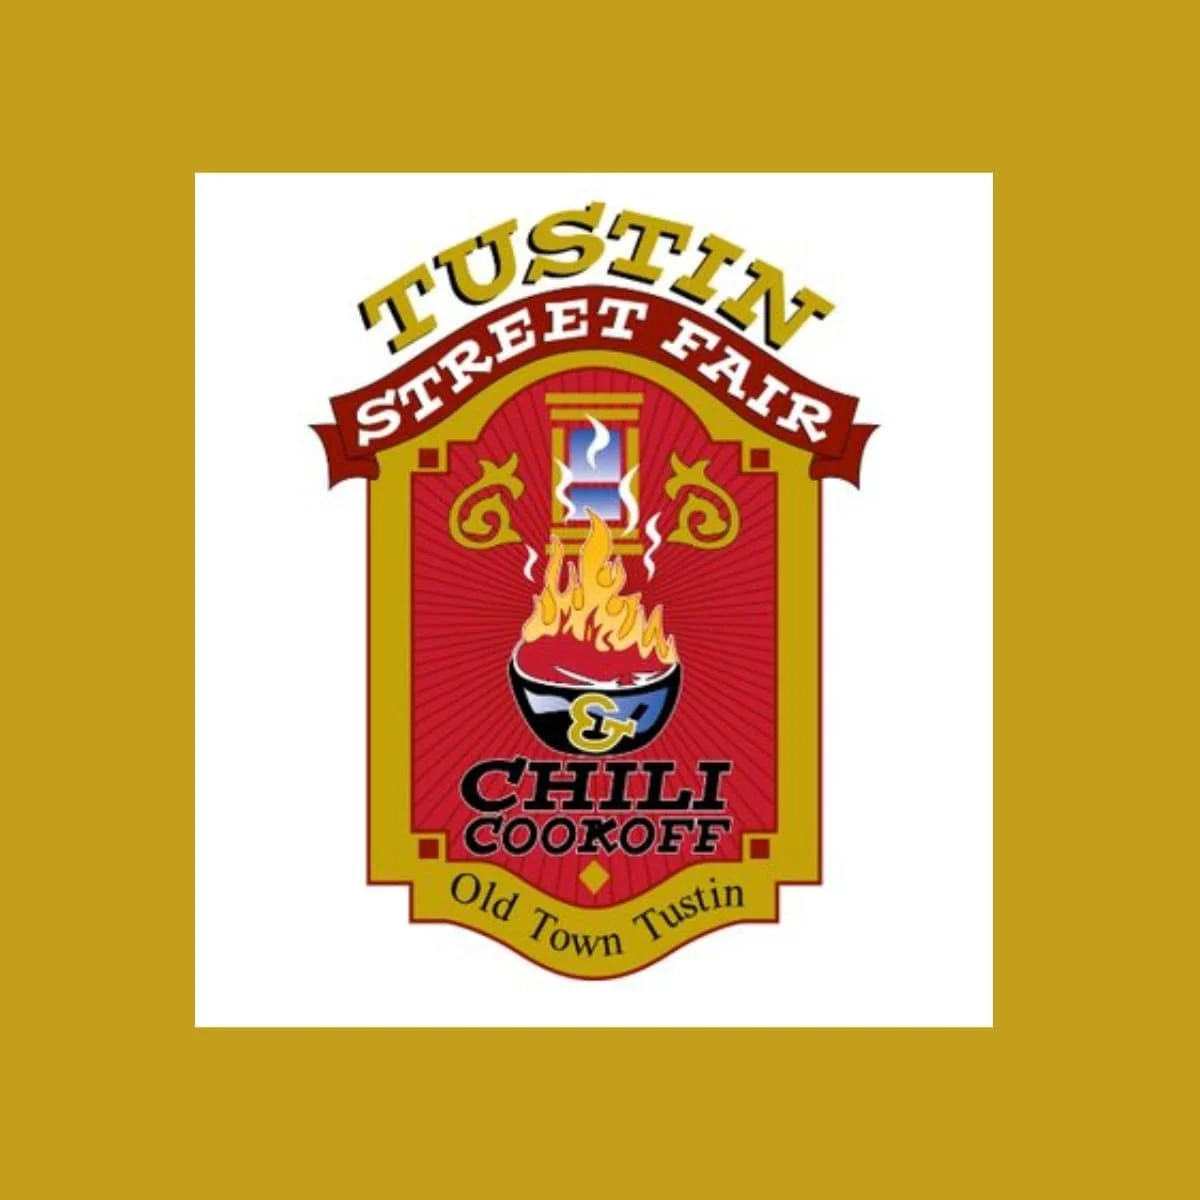 Tustin Street Fair and Chili Cookoff